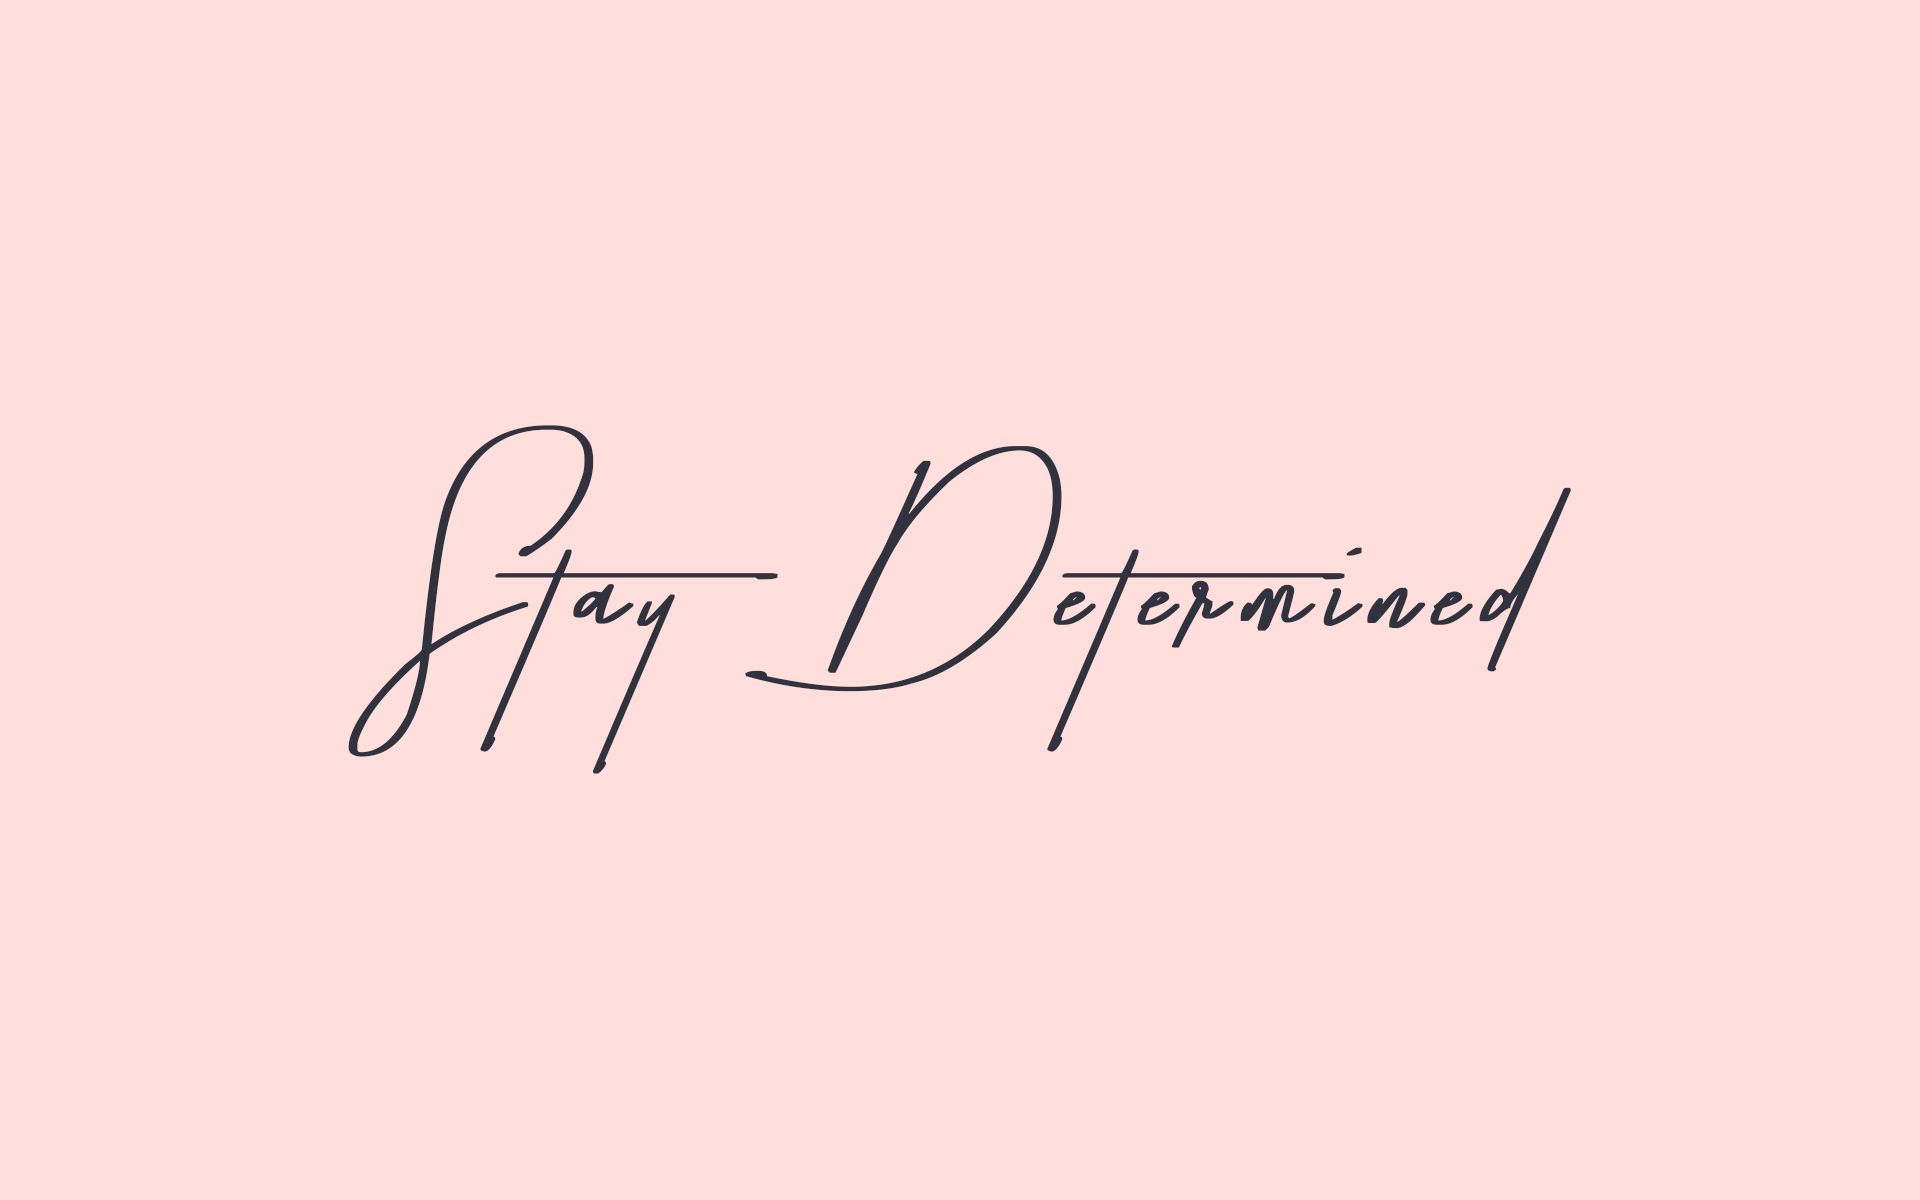 Stay Determined!. Keep yourself motivated with this cute pink +